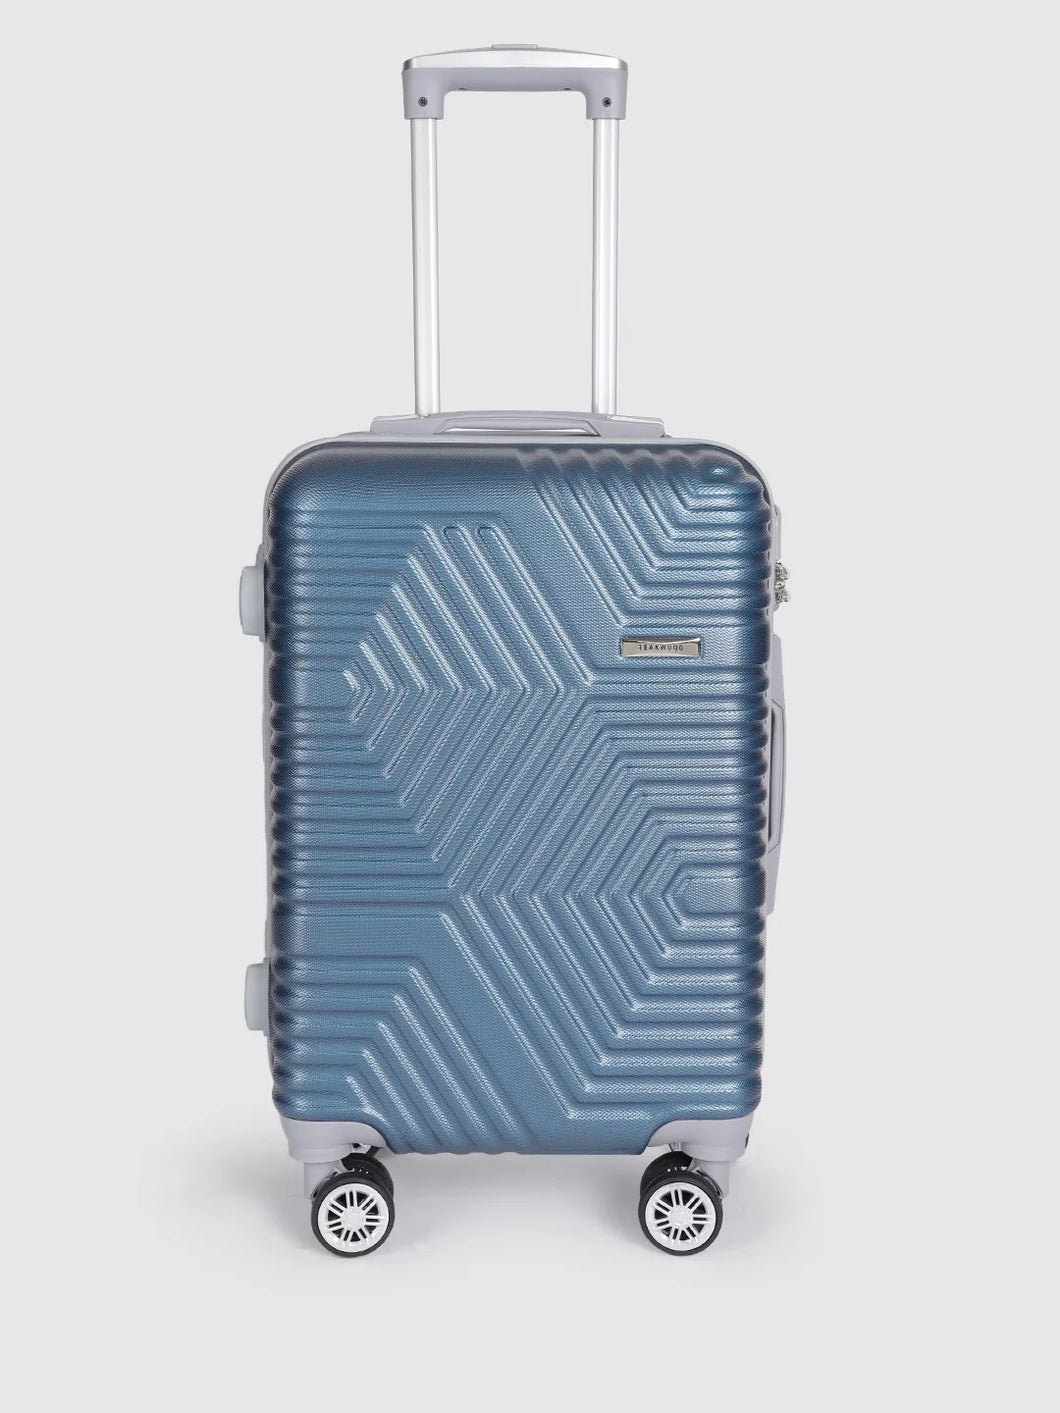 Blue-Toned Textured Hard-Sided Trolley Suitcase